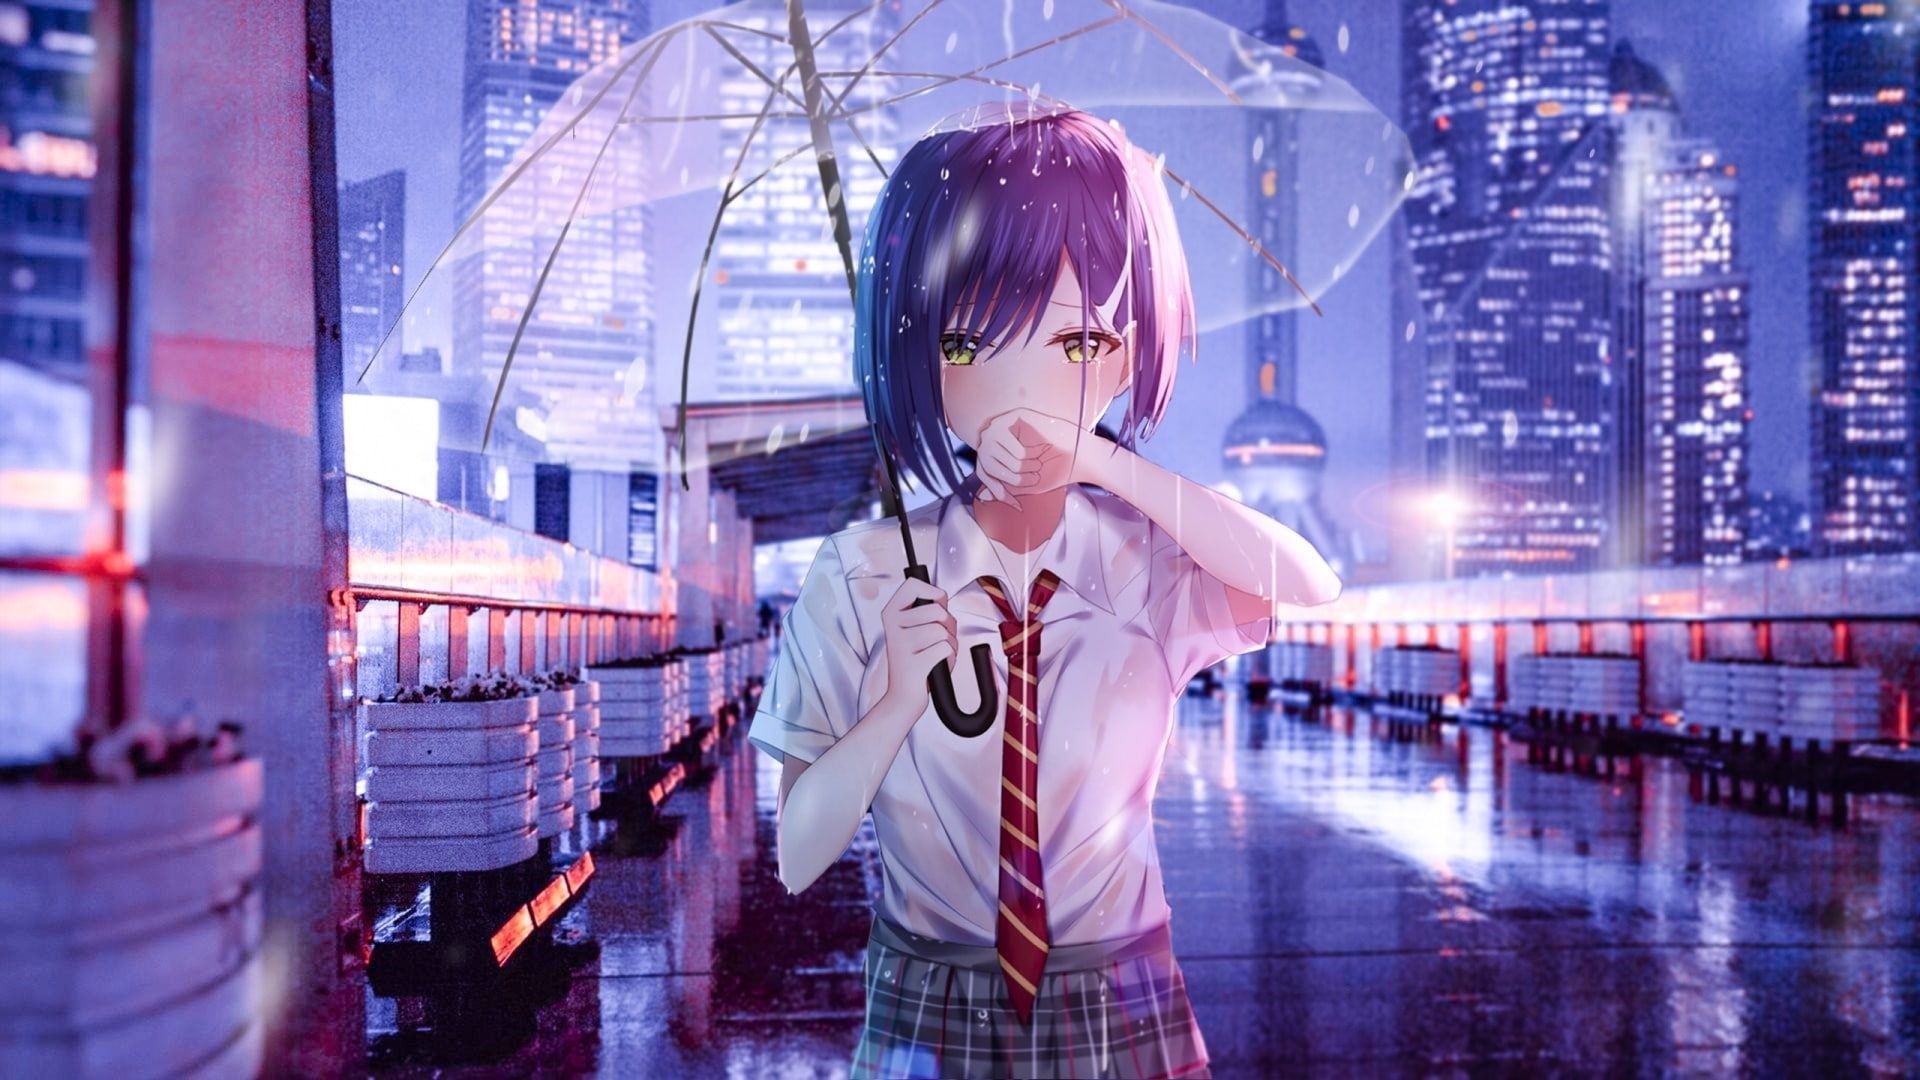 Anime Rain download free wallpaper for pc in hd